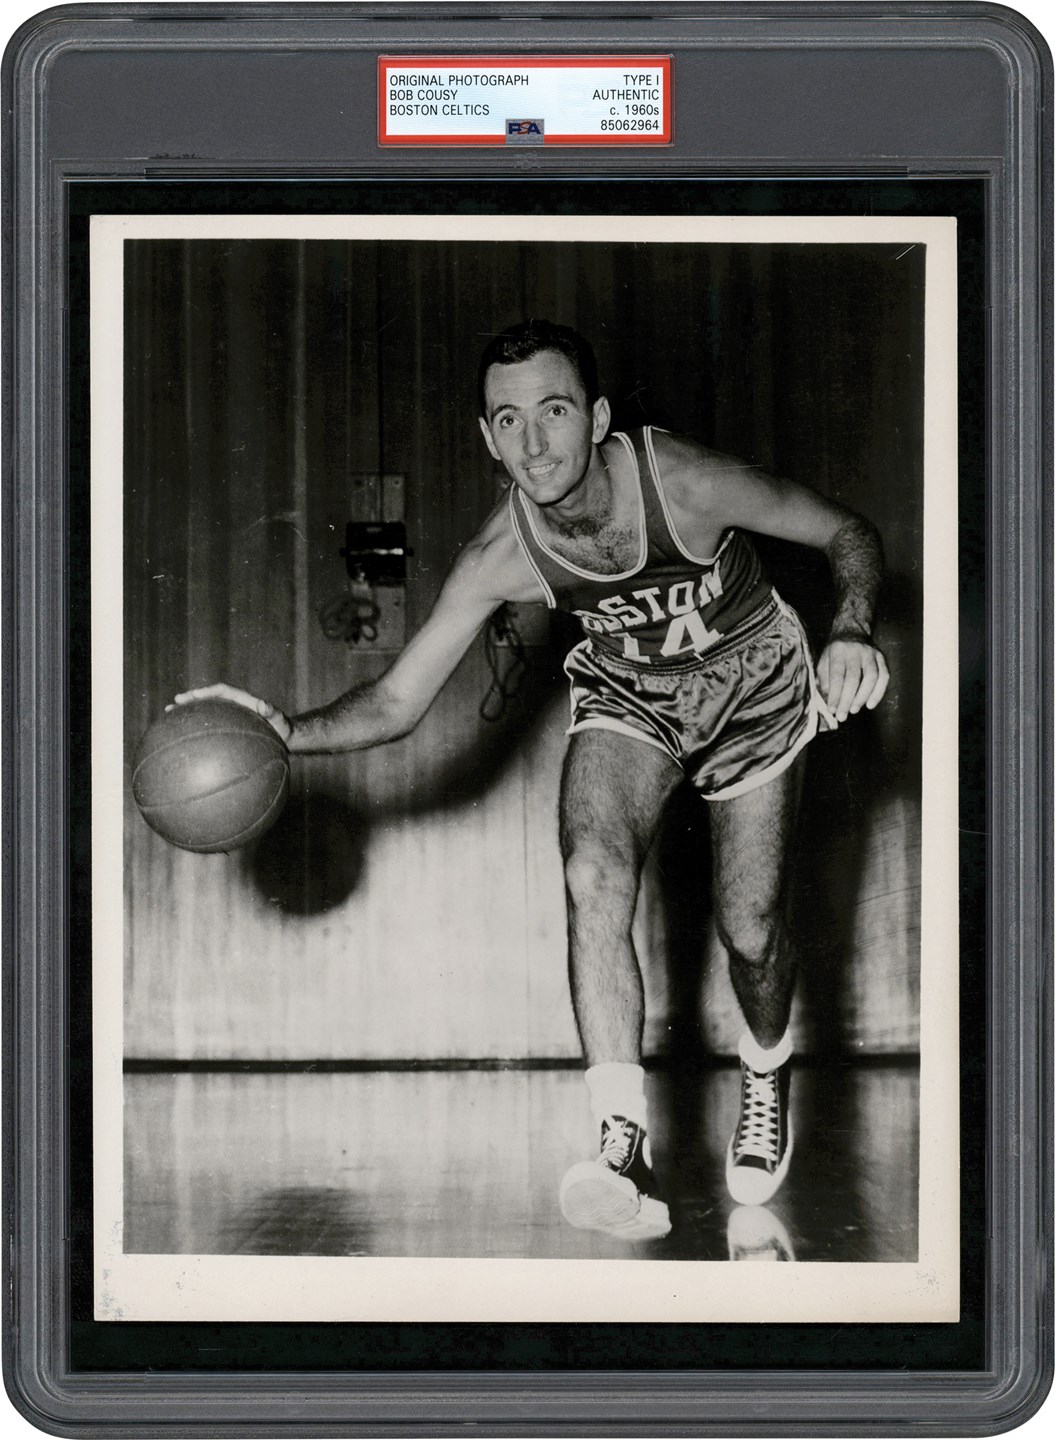 - Circa 1960s Bob Cousy Original Photograph Used for 1963 HP Hood Dairy Card (PSA Type I)